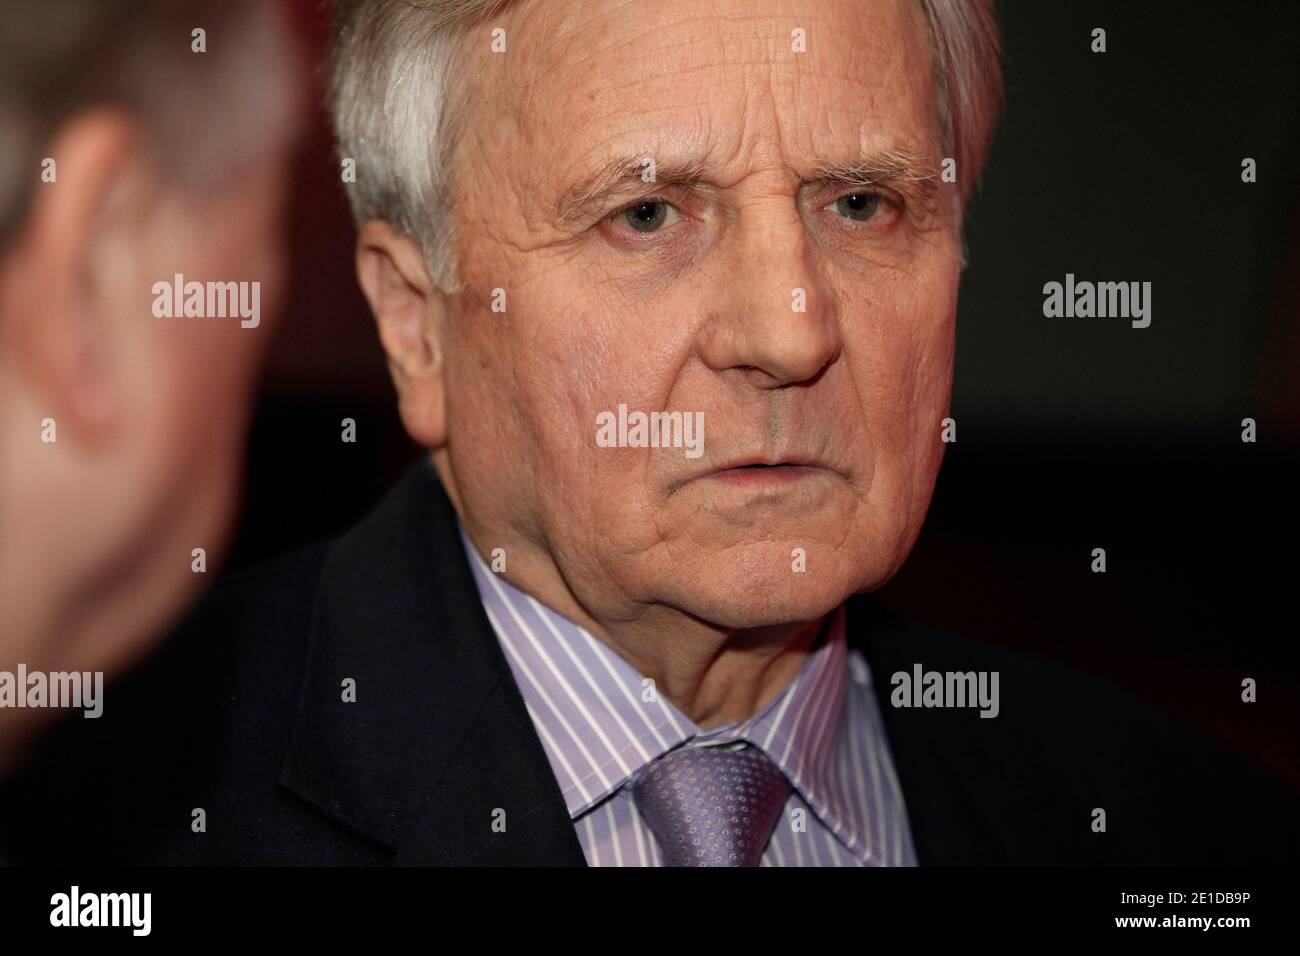 Page 4 - Trichet 2011 High Resolution Stock Photography and Images - Alamy